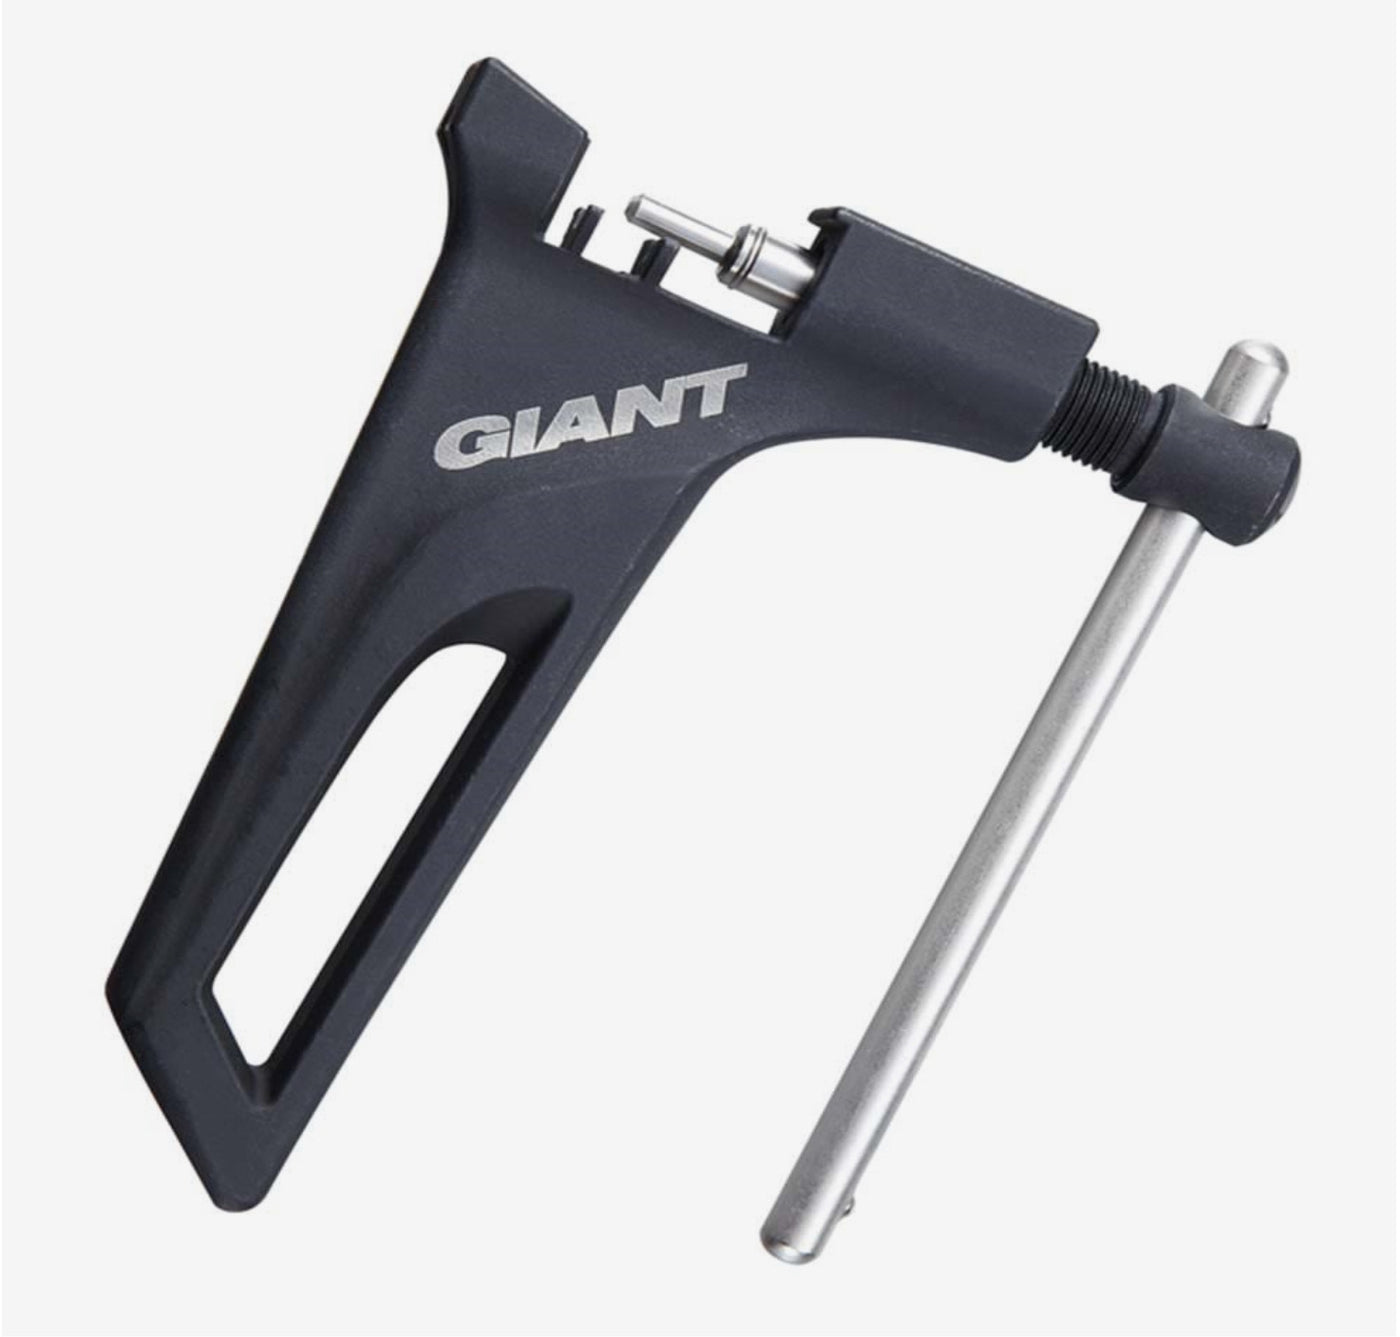 Giant ToolShed CT